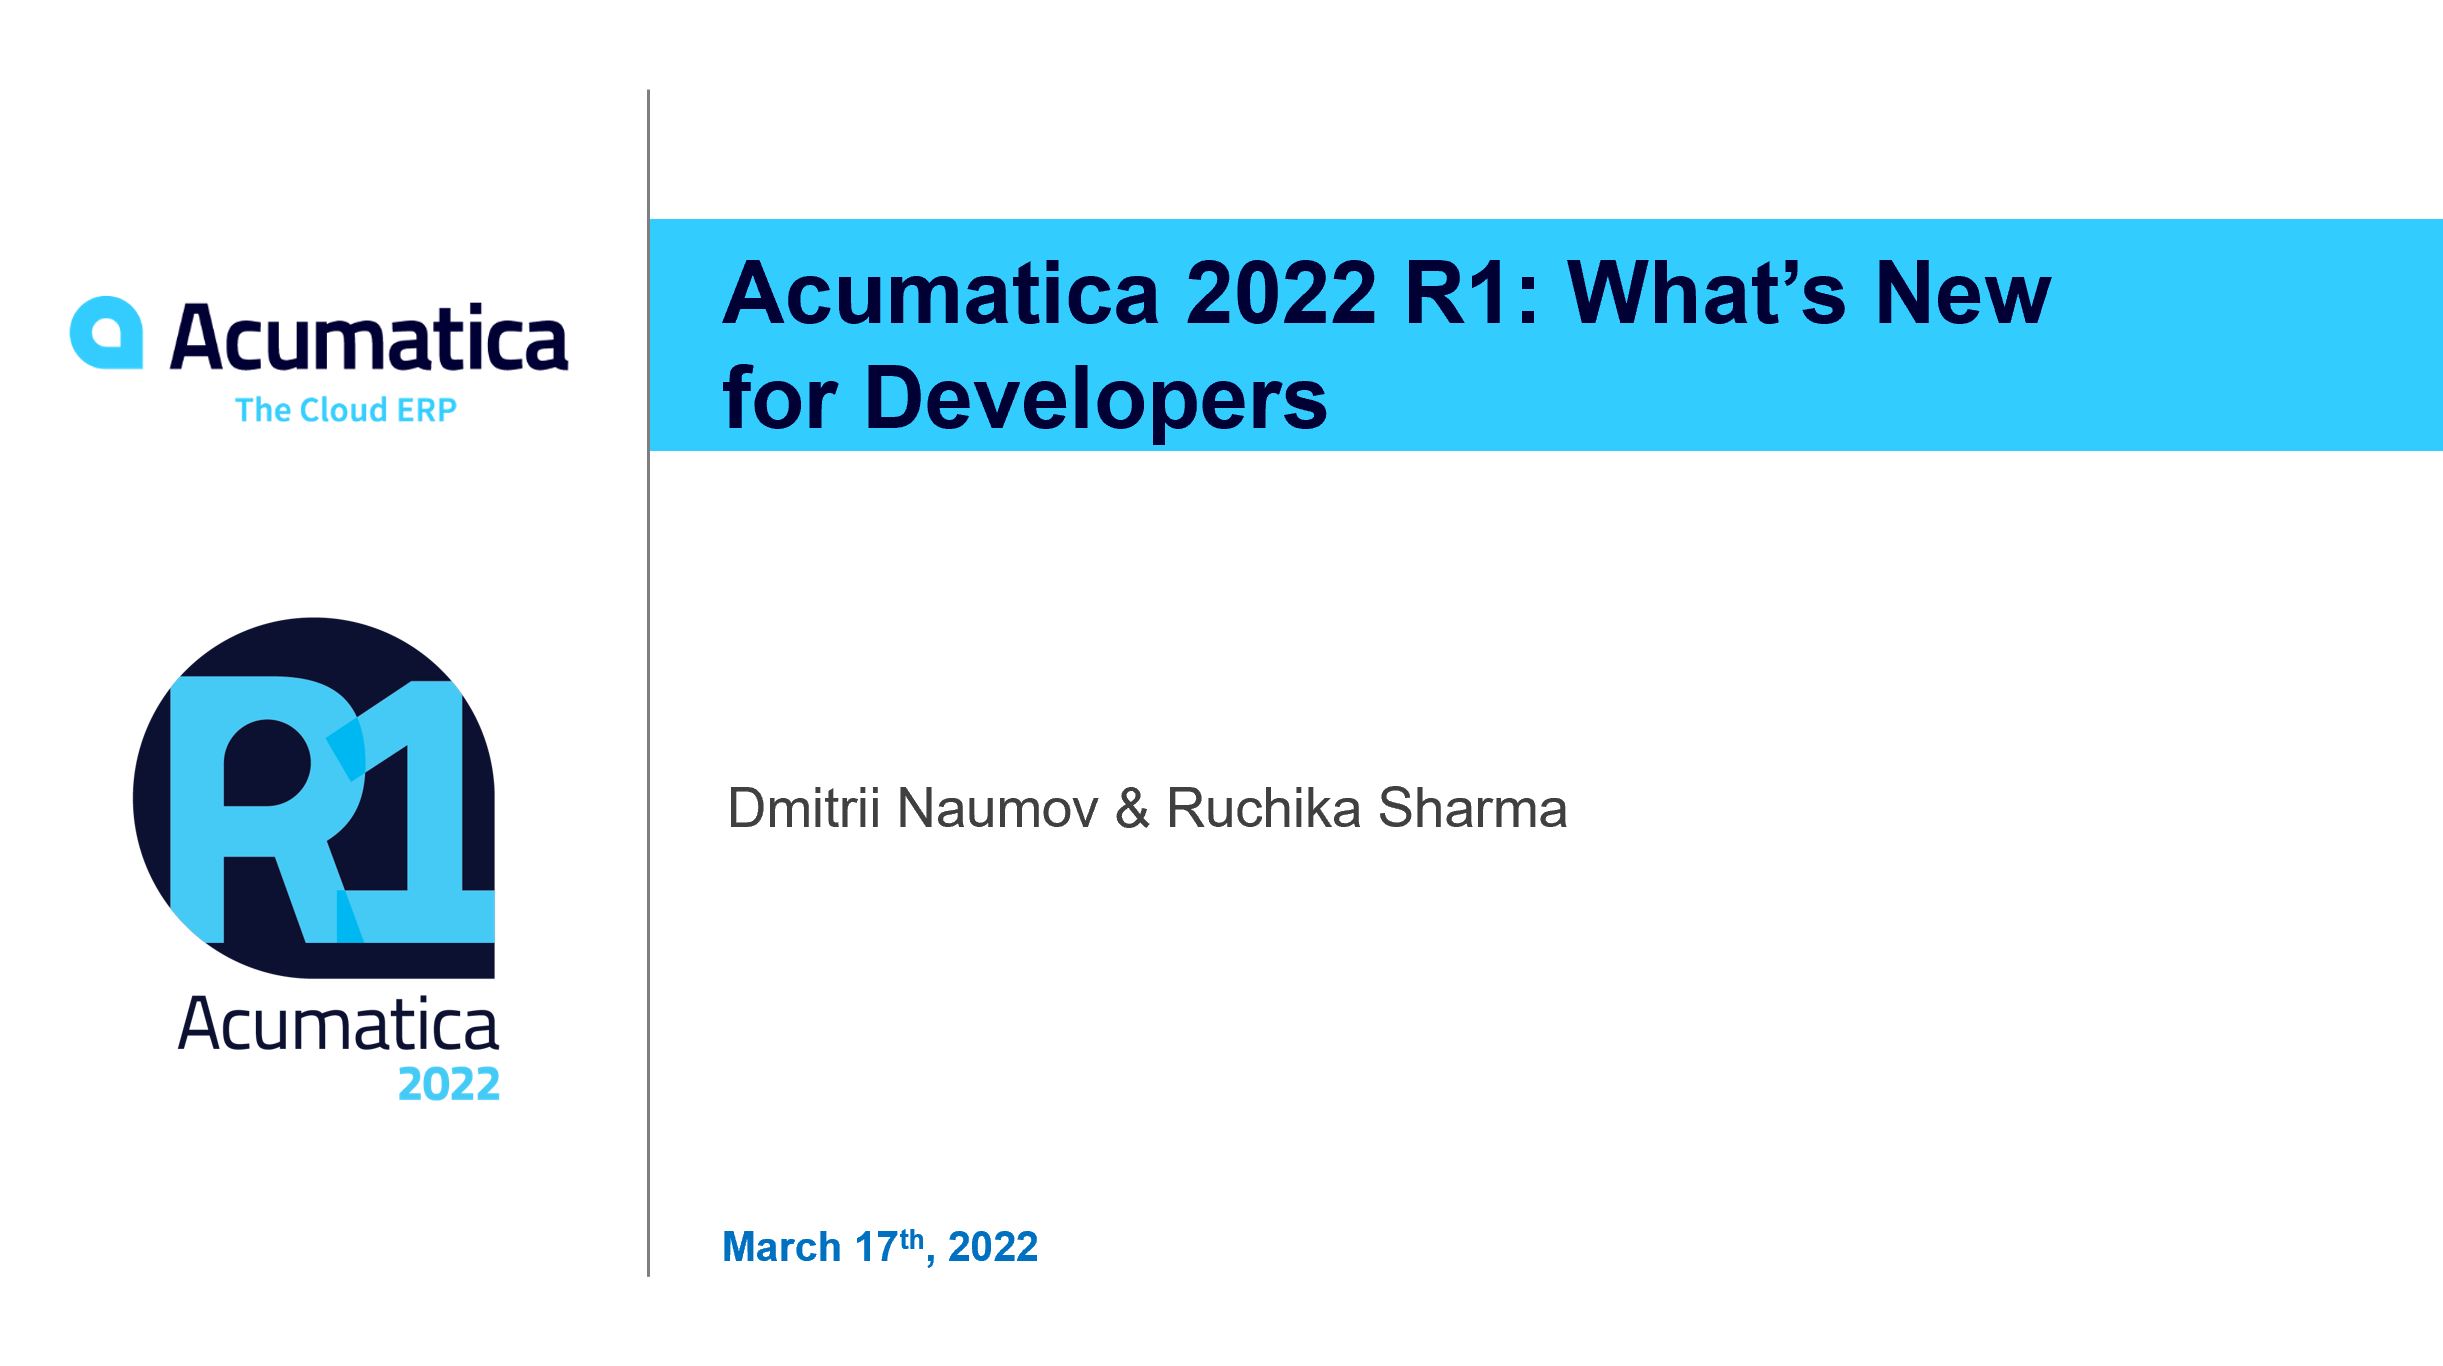 Acumatica Webinar: What's New for Developers in 2022 R1